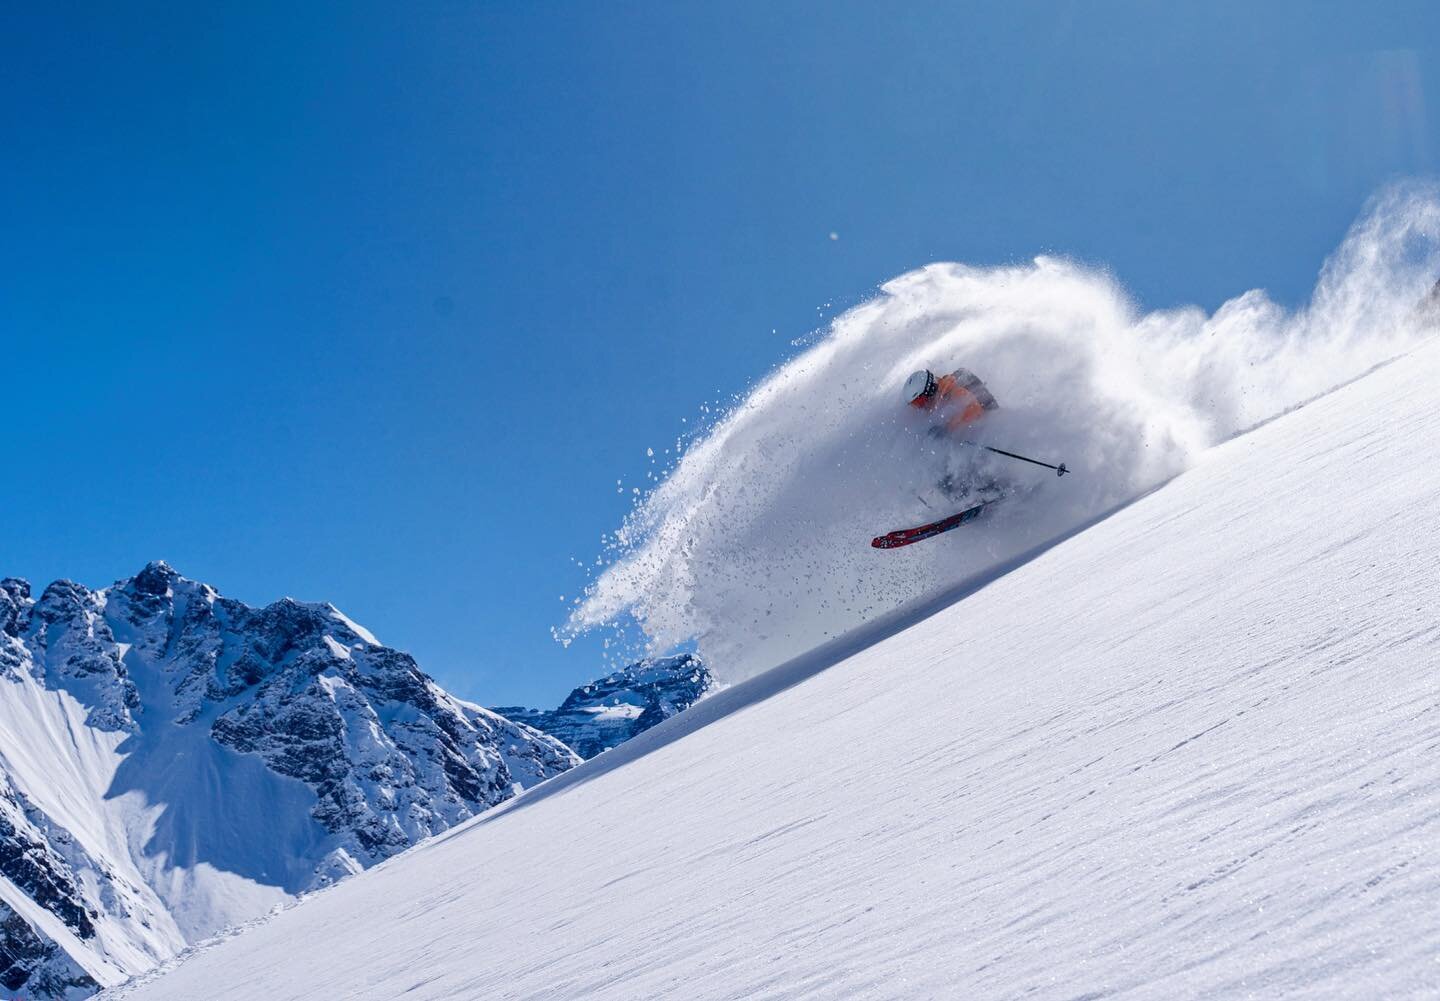 A Chilean powder day this past August @skiportillo&hellip; send some of this to North America soon please 🙏🏼 ❄️ 🤍 Photo: @liam_doran_outdoors #weareskiing #powderdaydreams